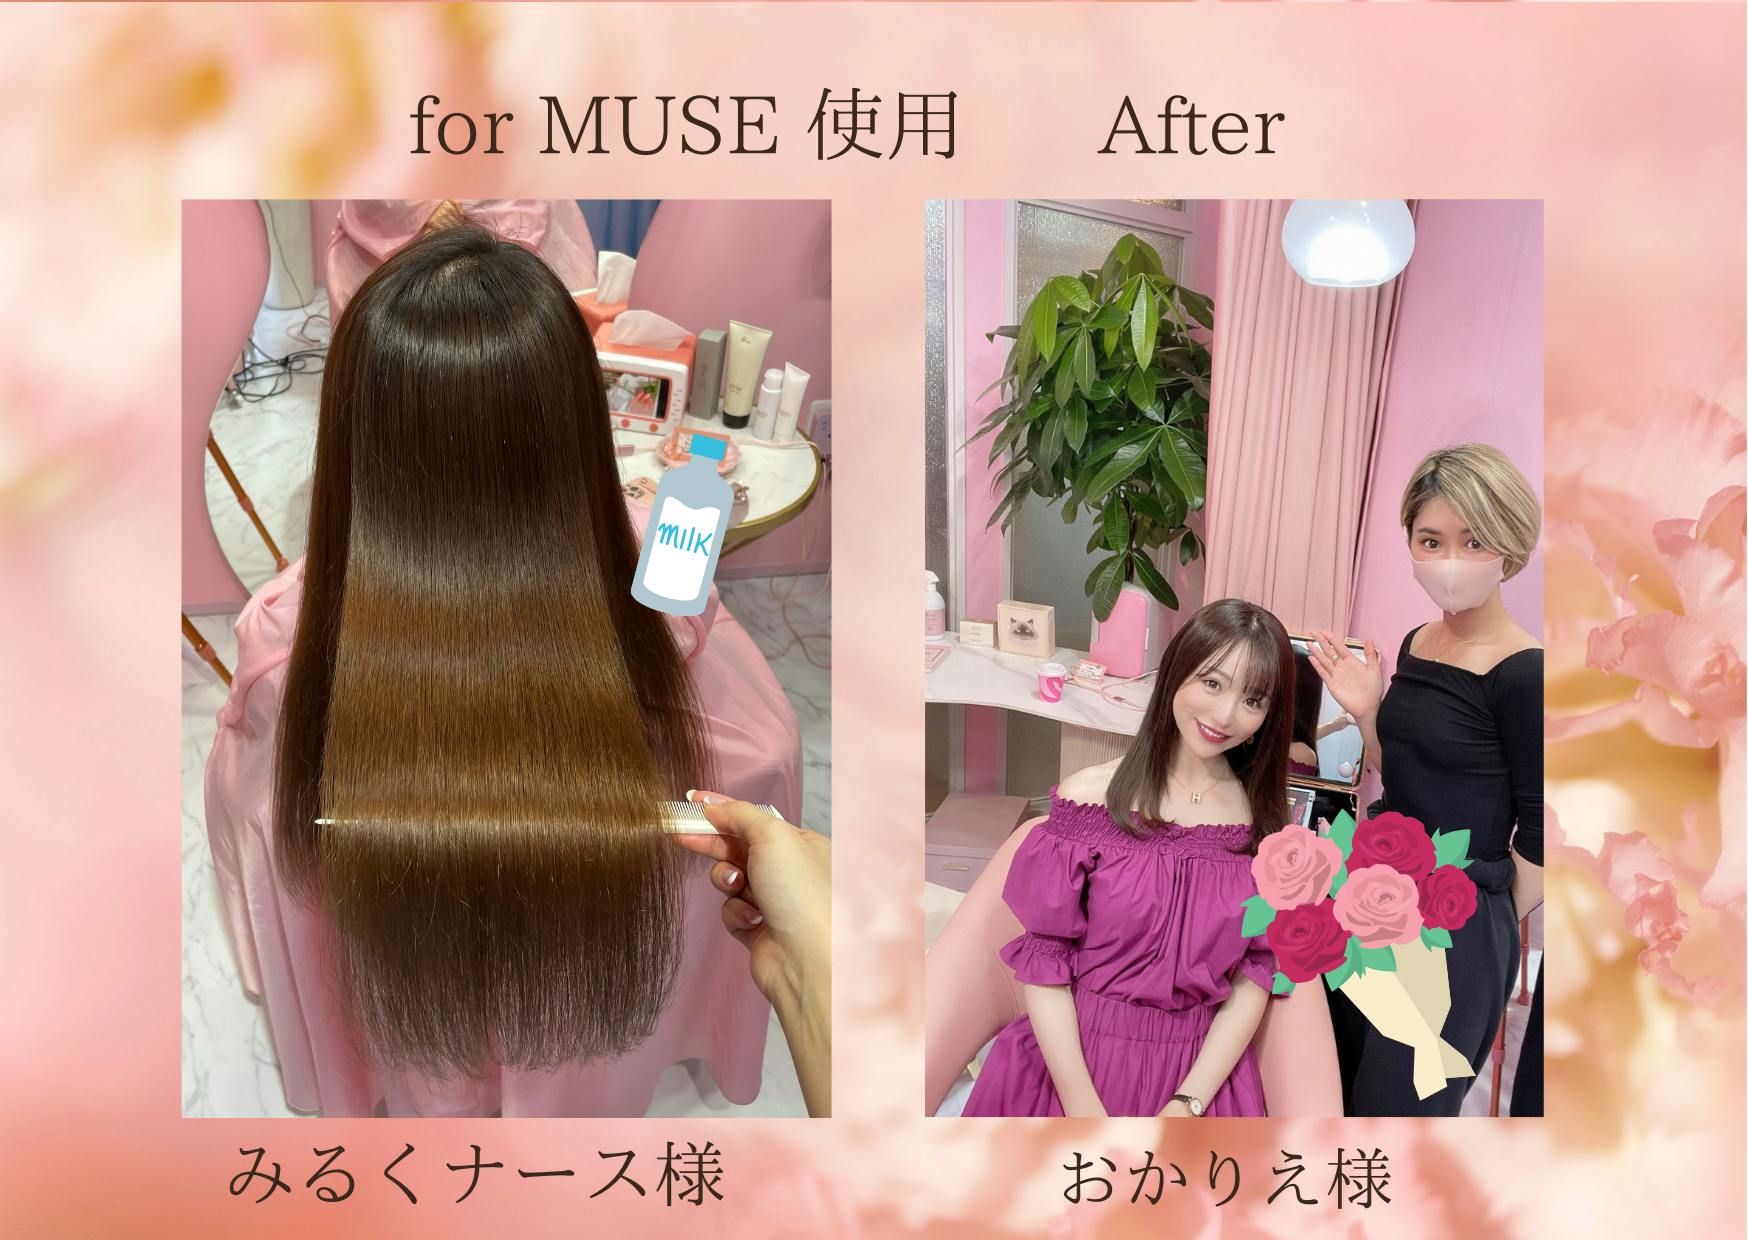 B next radiant ラディアント LM125-MUSE ヘアアイロン シルクプレート ラディアント ピンク 値頃 - ヘアケア、頭皮ケア